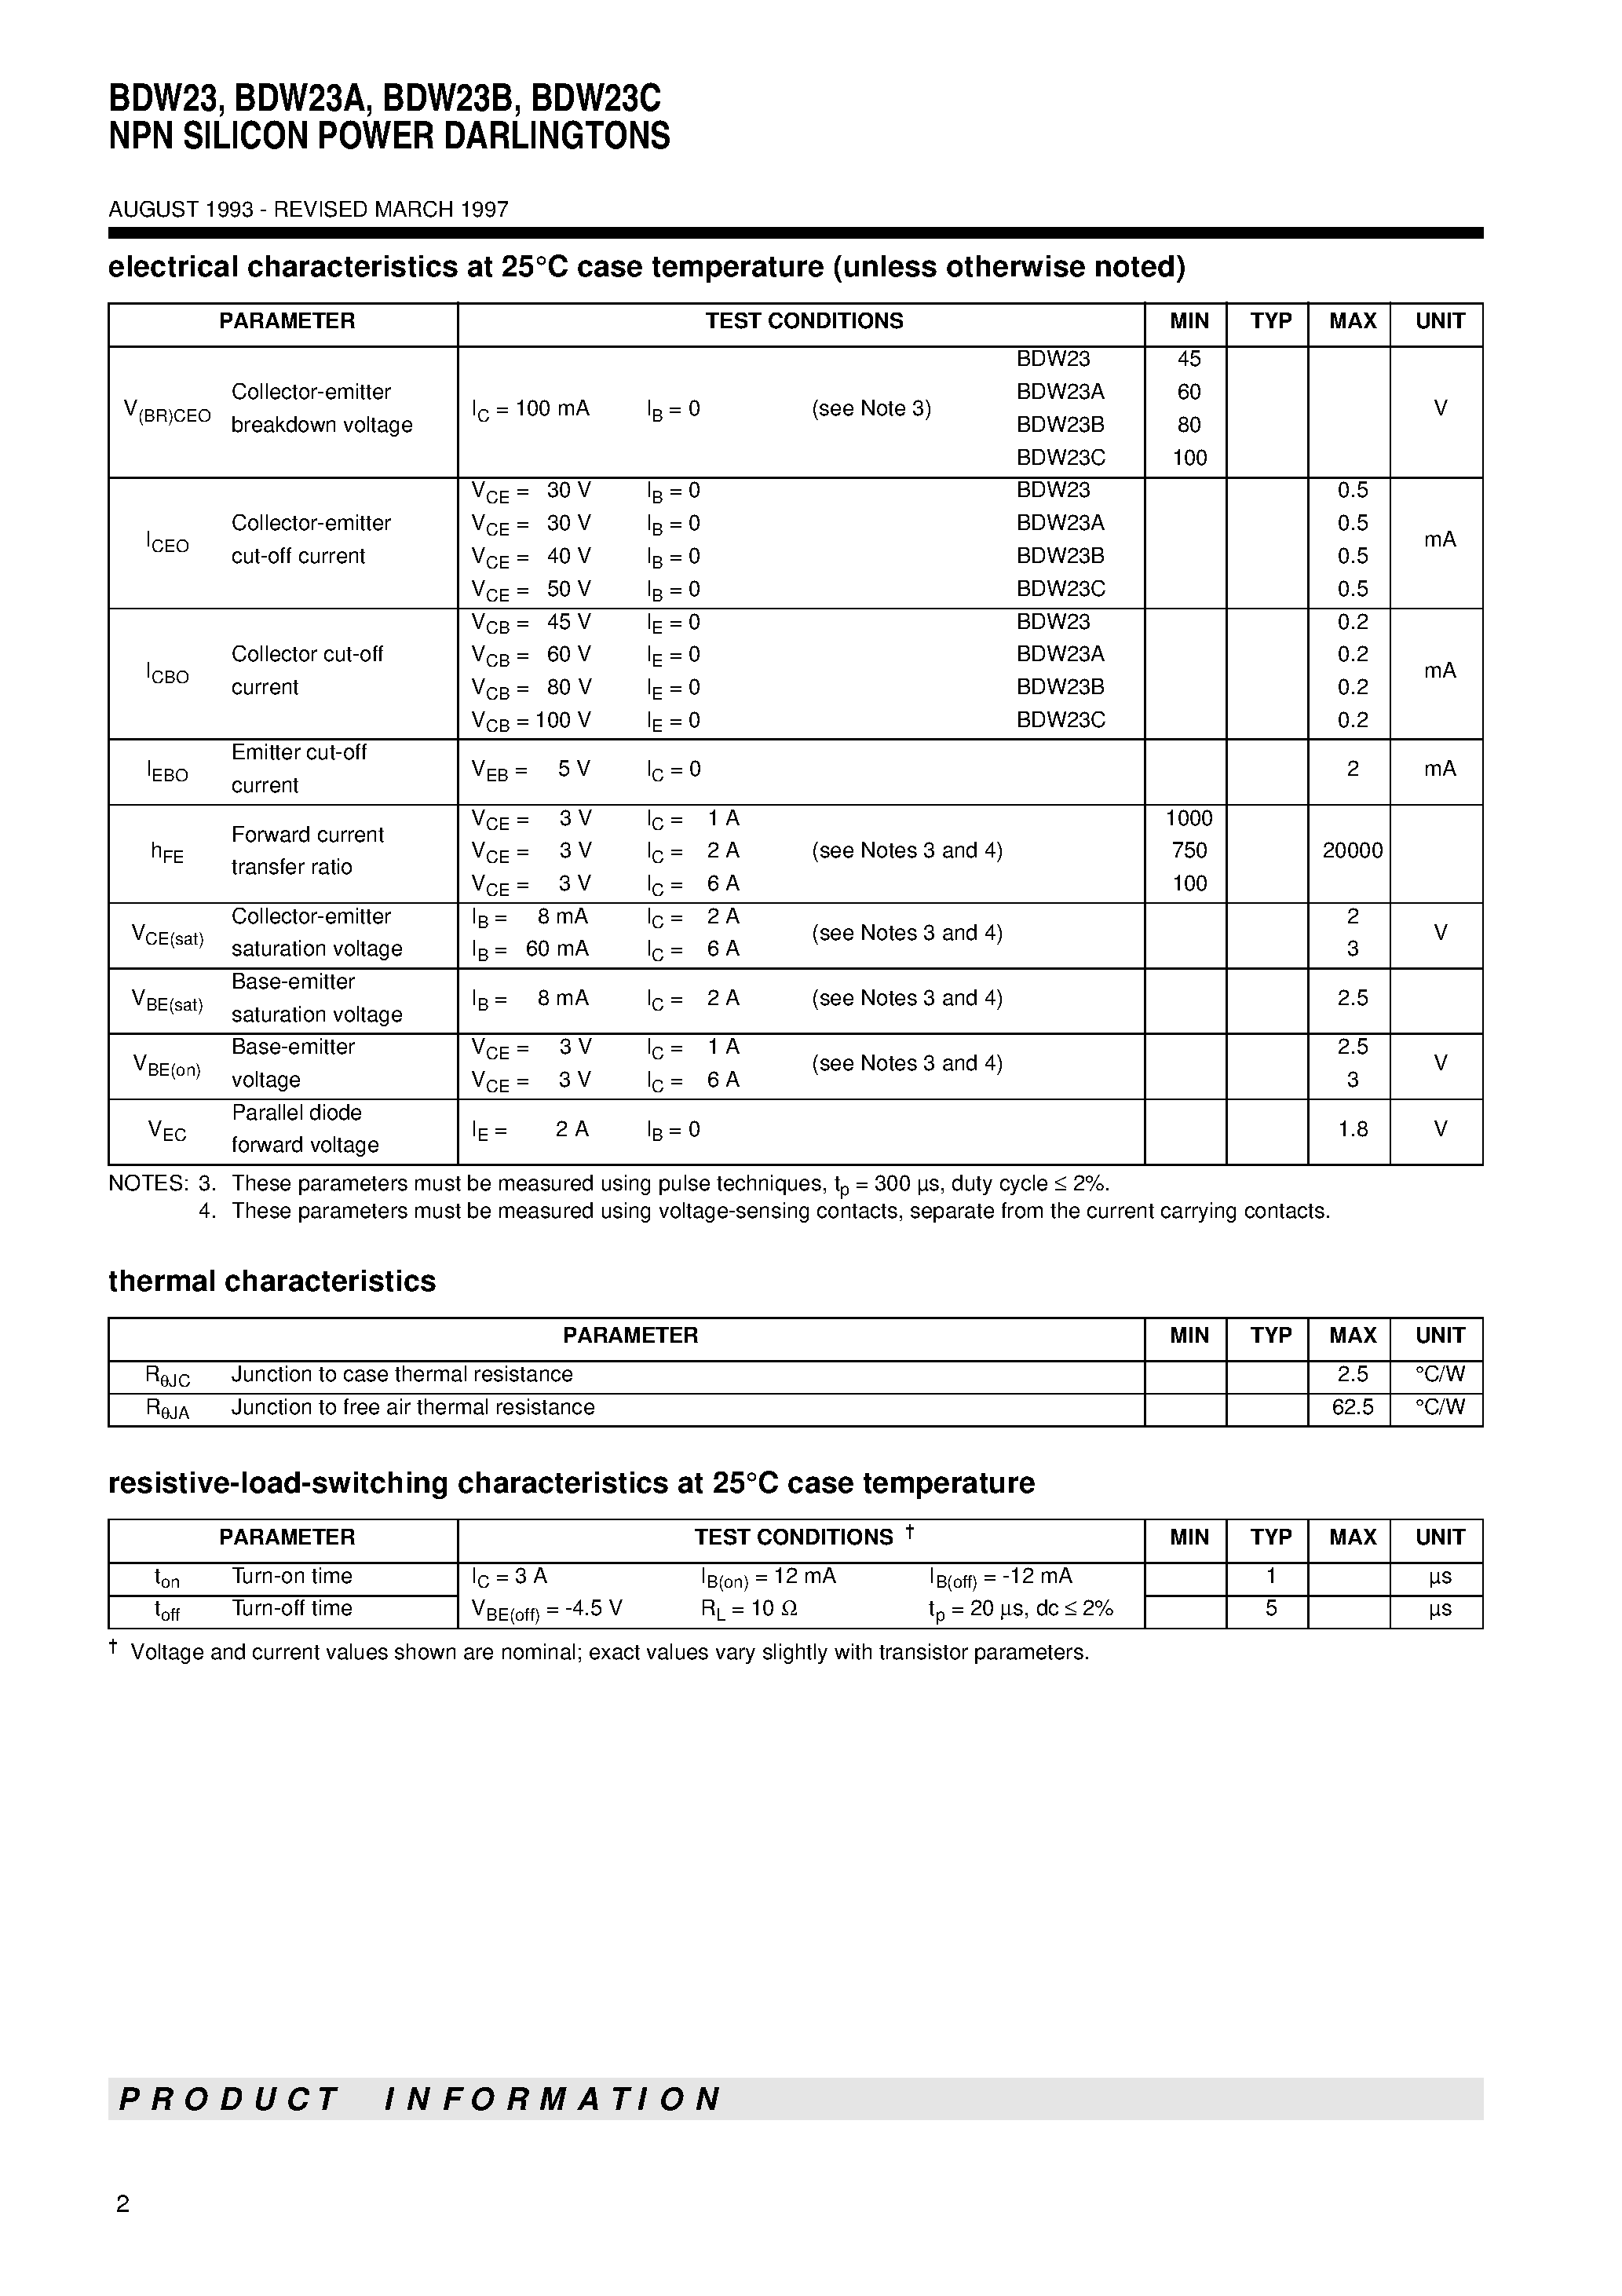 Datasheet BDW23A - NPN SILICON POWER DARLINGTONS page 2